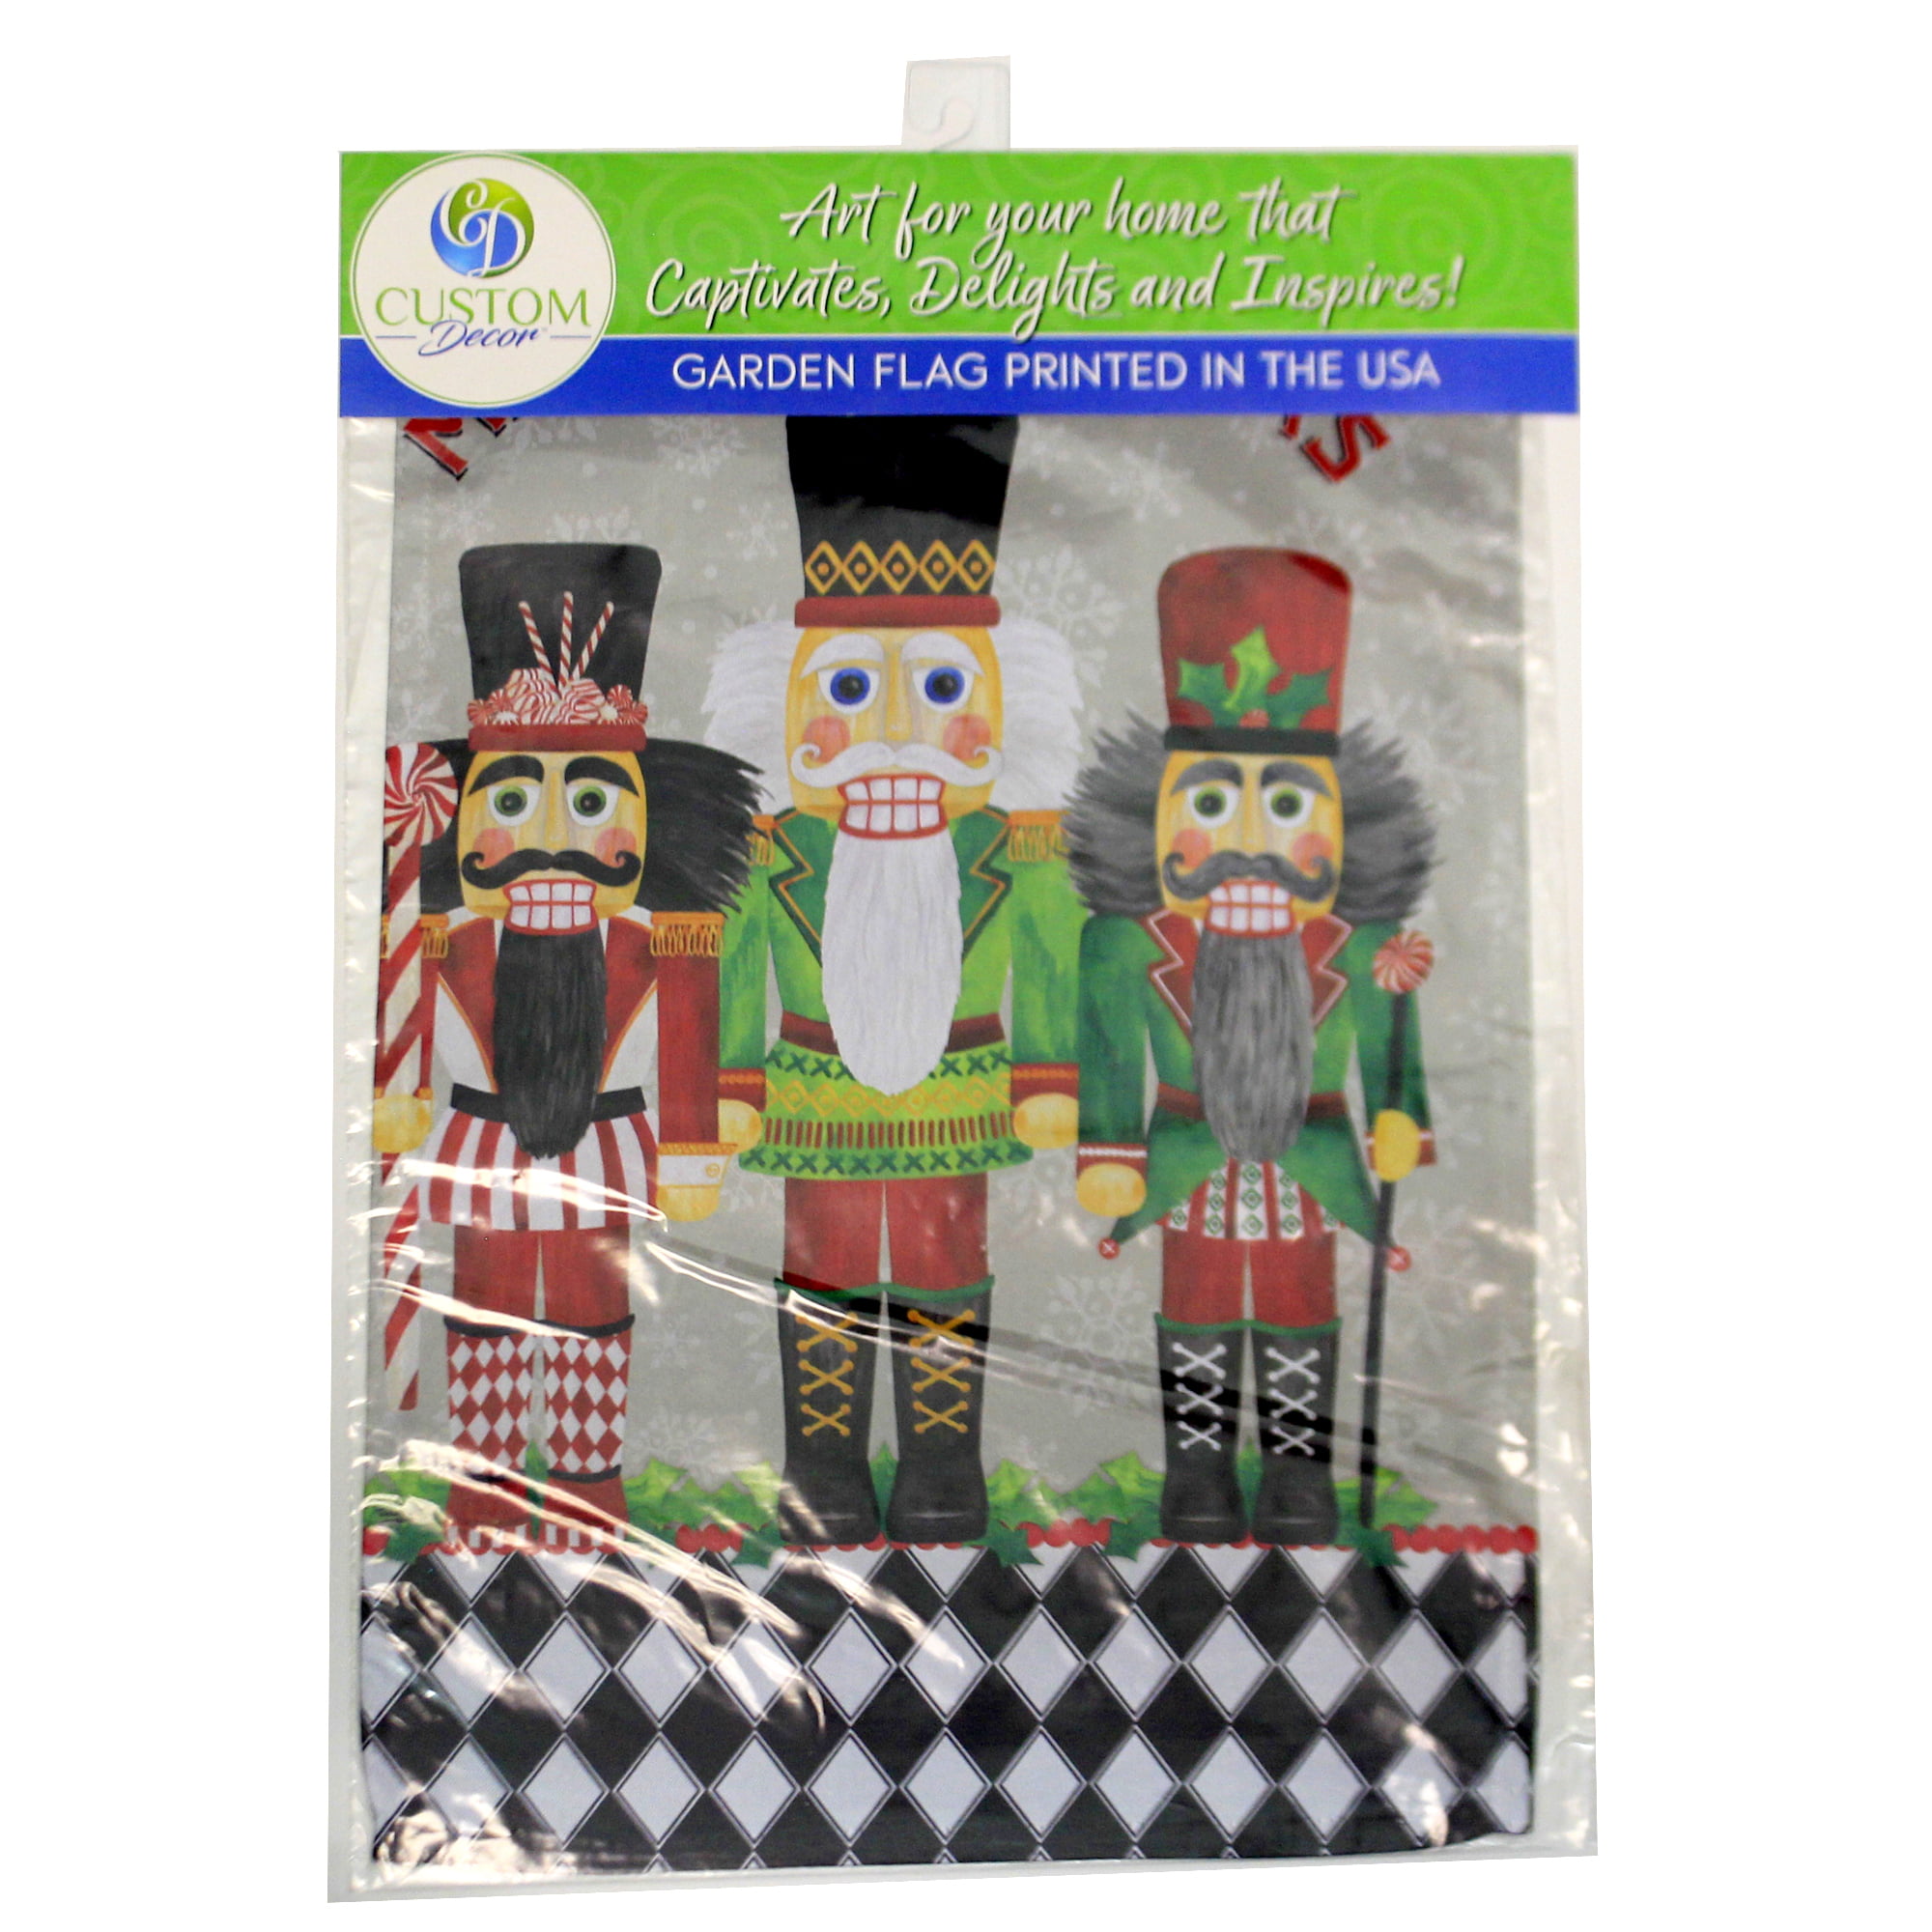 Printed in the USA NEW! Merry Christmas Nutcrackers Garden Flag 